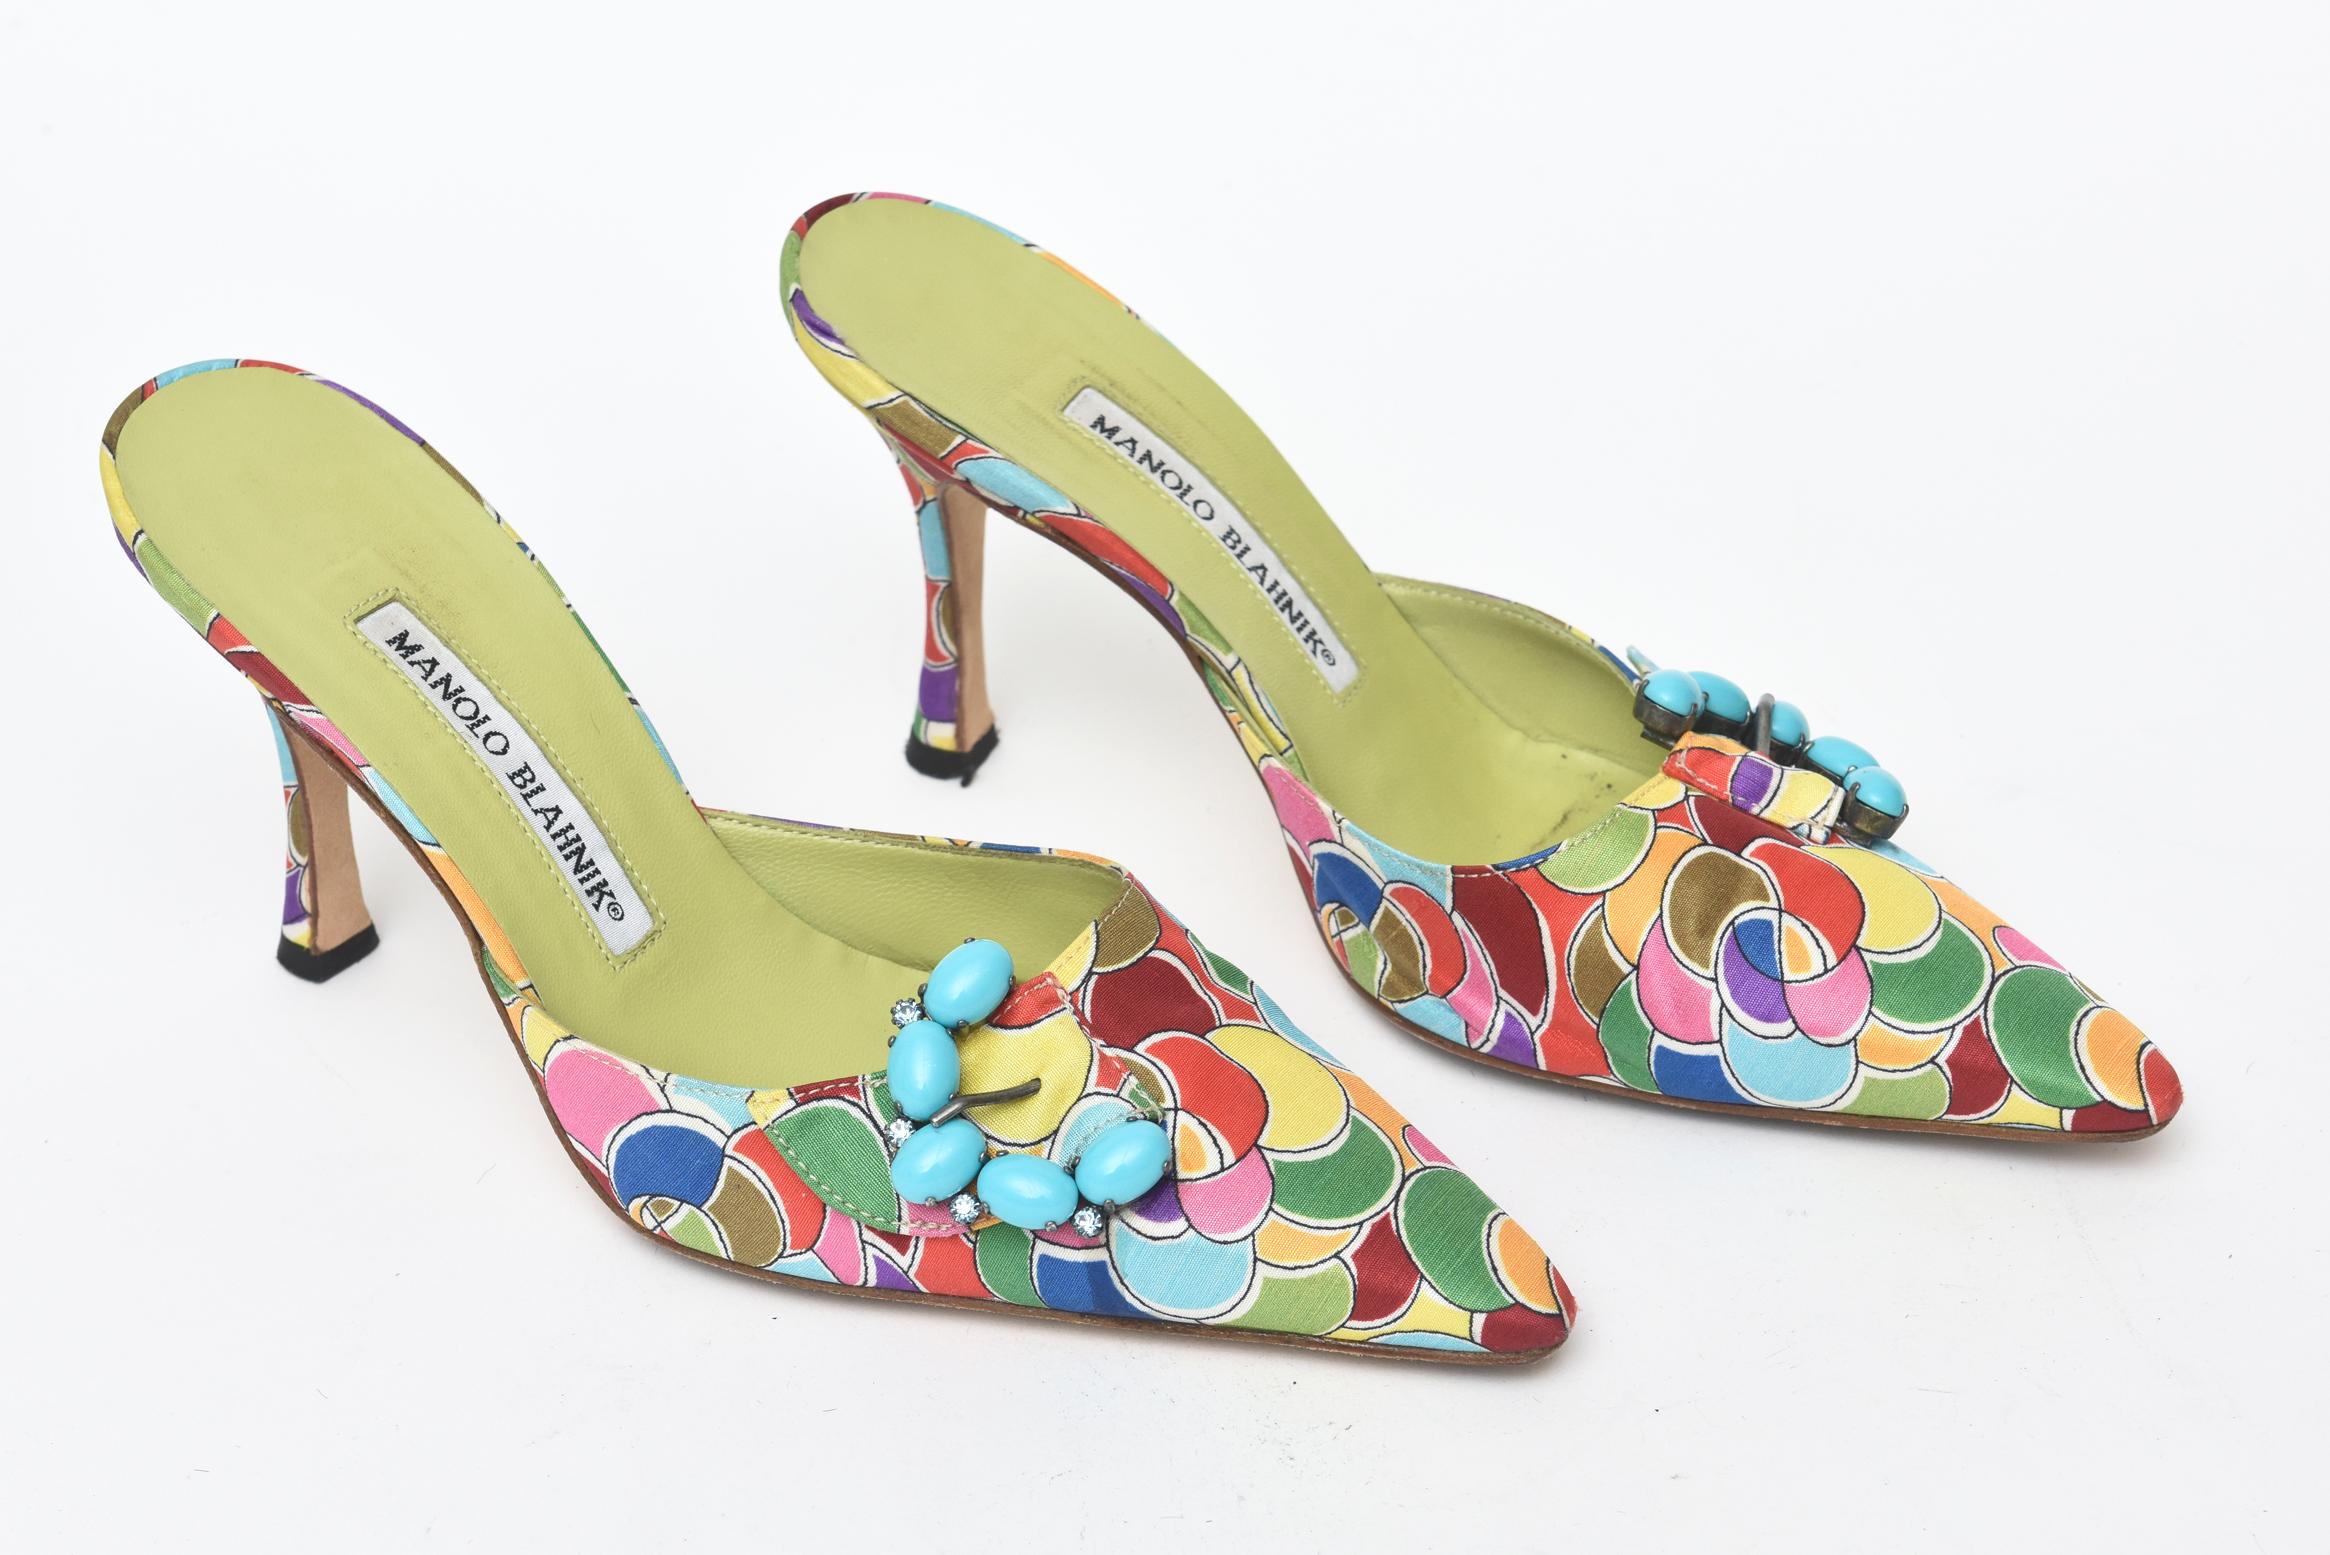 This gorgeous pair of Manolo Blahnik pair of sexy mules have the most luscious silk printed design on them with chartreuse leather interior. The design is very Pucci esque. The turquoise like stones in a half moon cluster on the side add dimension